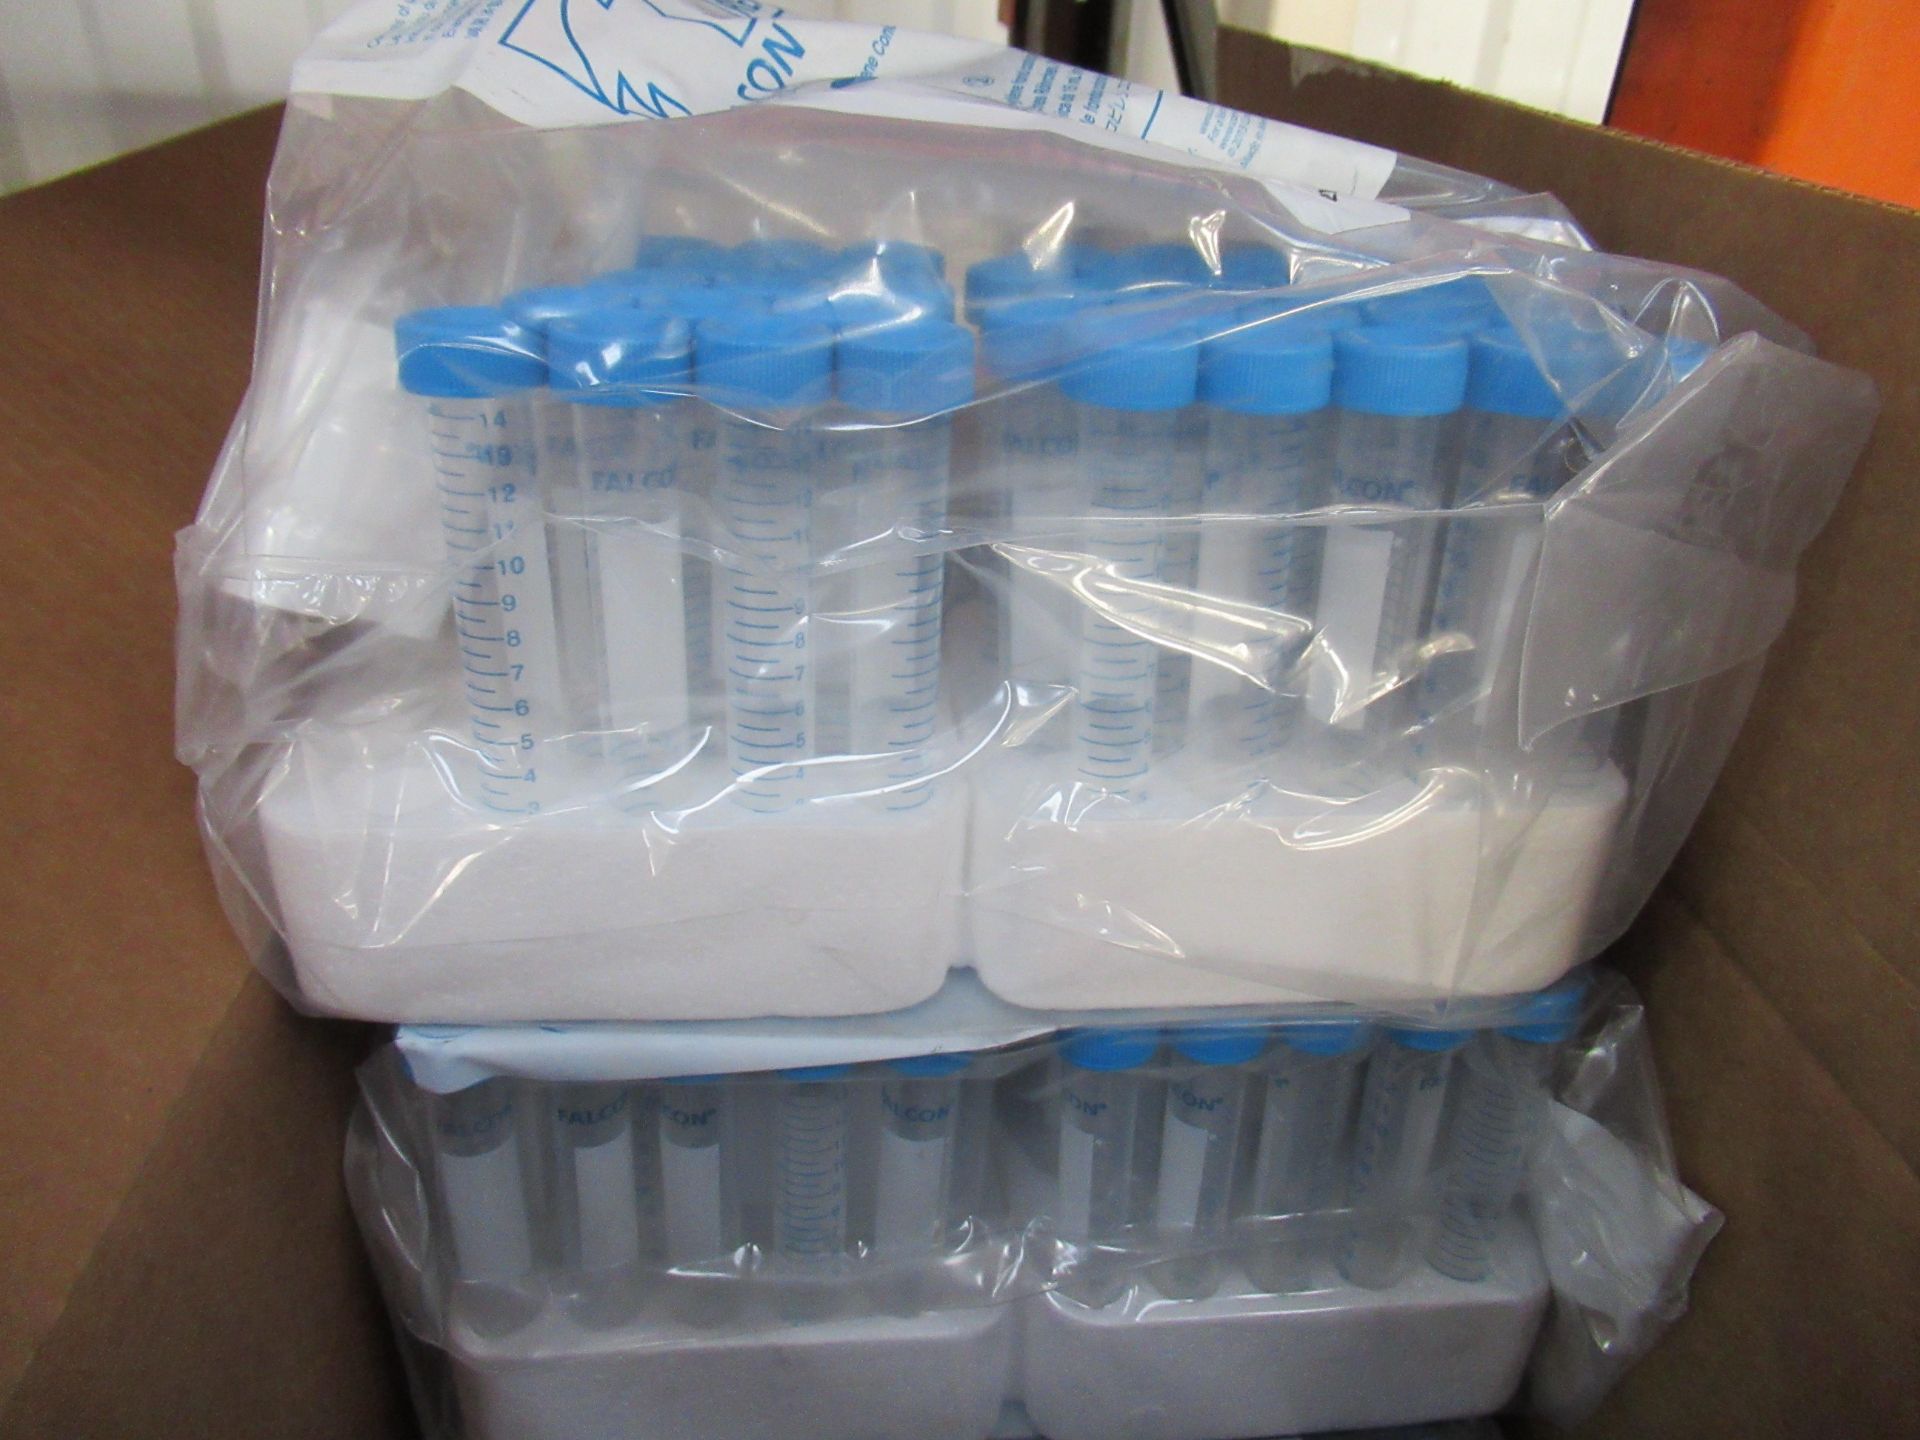 Approx. 1000x (2x boxes) 15ml polypropylene conical tubes (17mm x 170mm)